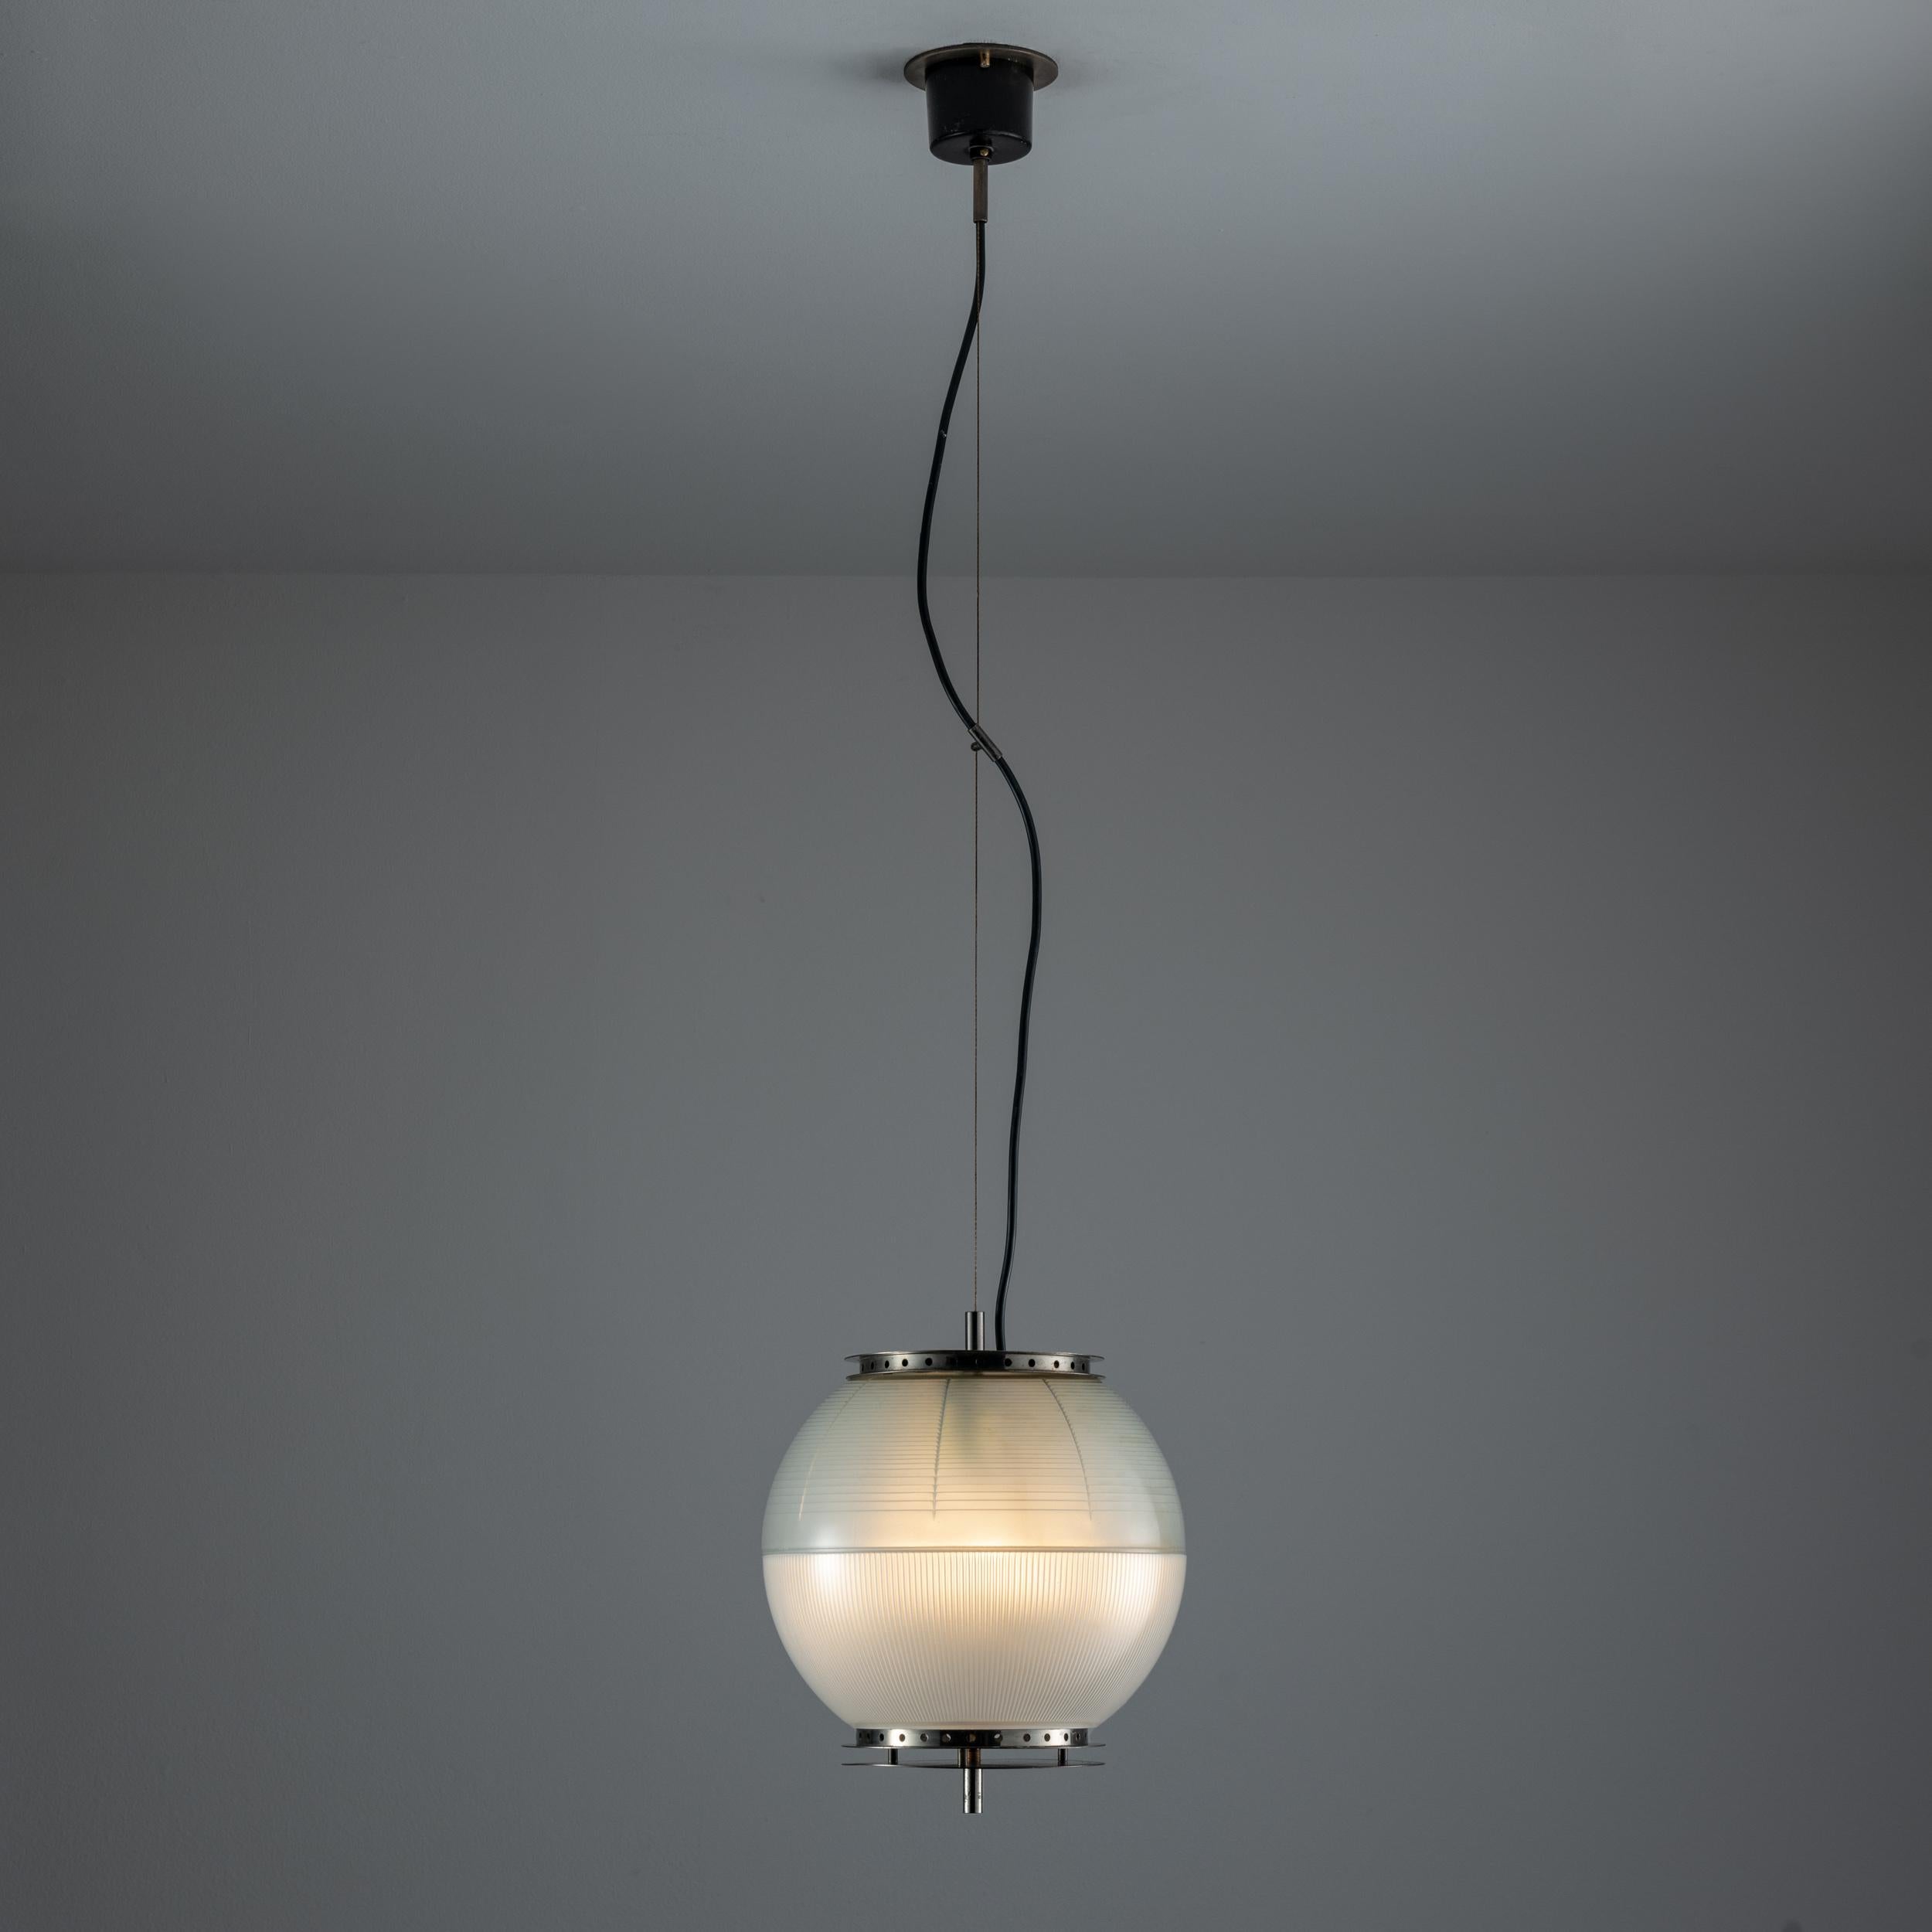 Suspension light by Suspension Light by Ignazio Gardella for Azucena. Designed and manufactured in Italy, circa 1960's. Holophane glass, chrome, nickel. We recommend Lamping Qty 3 E27 bulbs. Bulbs not included.